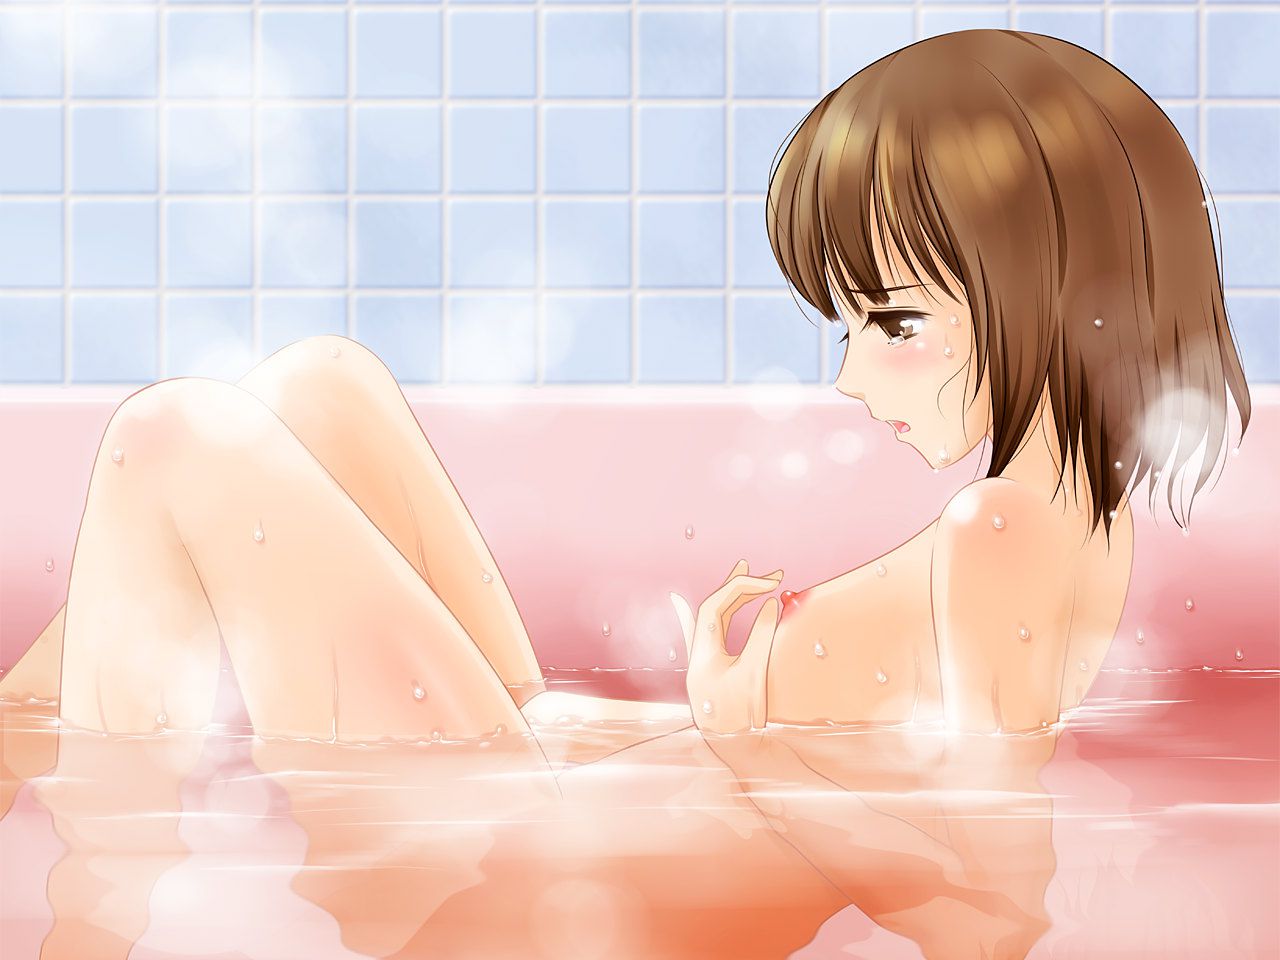 Erotic anime summary erotic image of a girl who is comfortable with masturbation [secondary erotic] 22